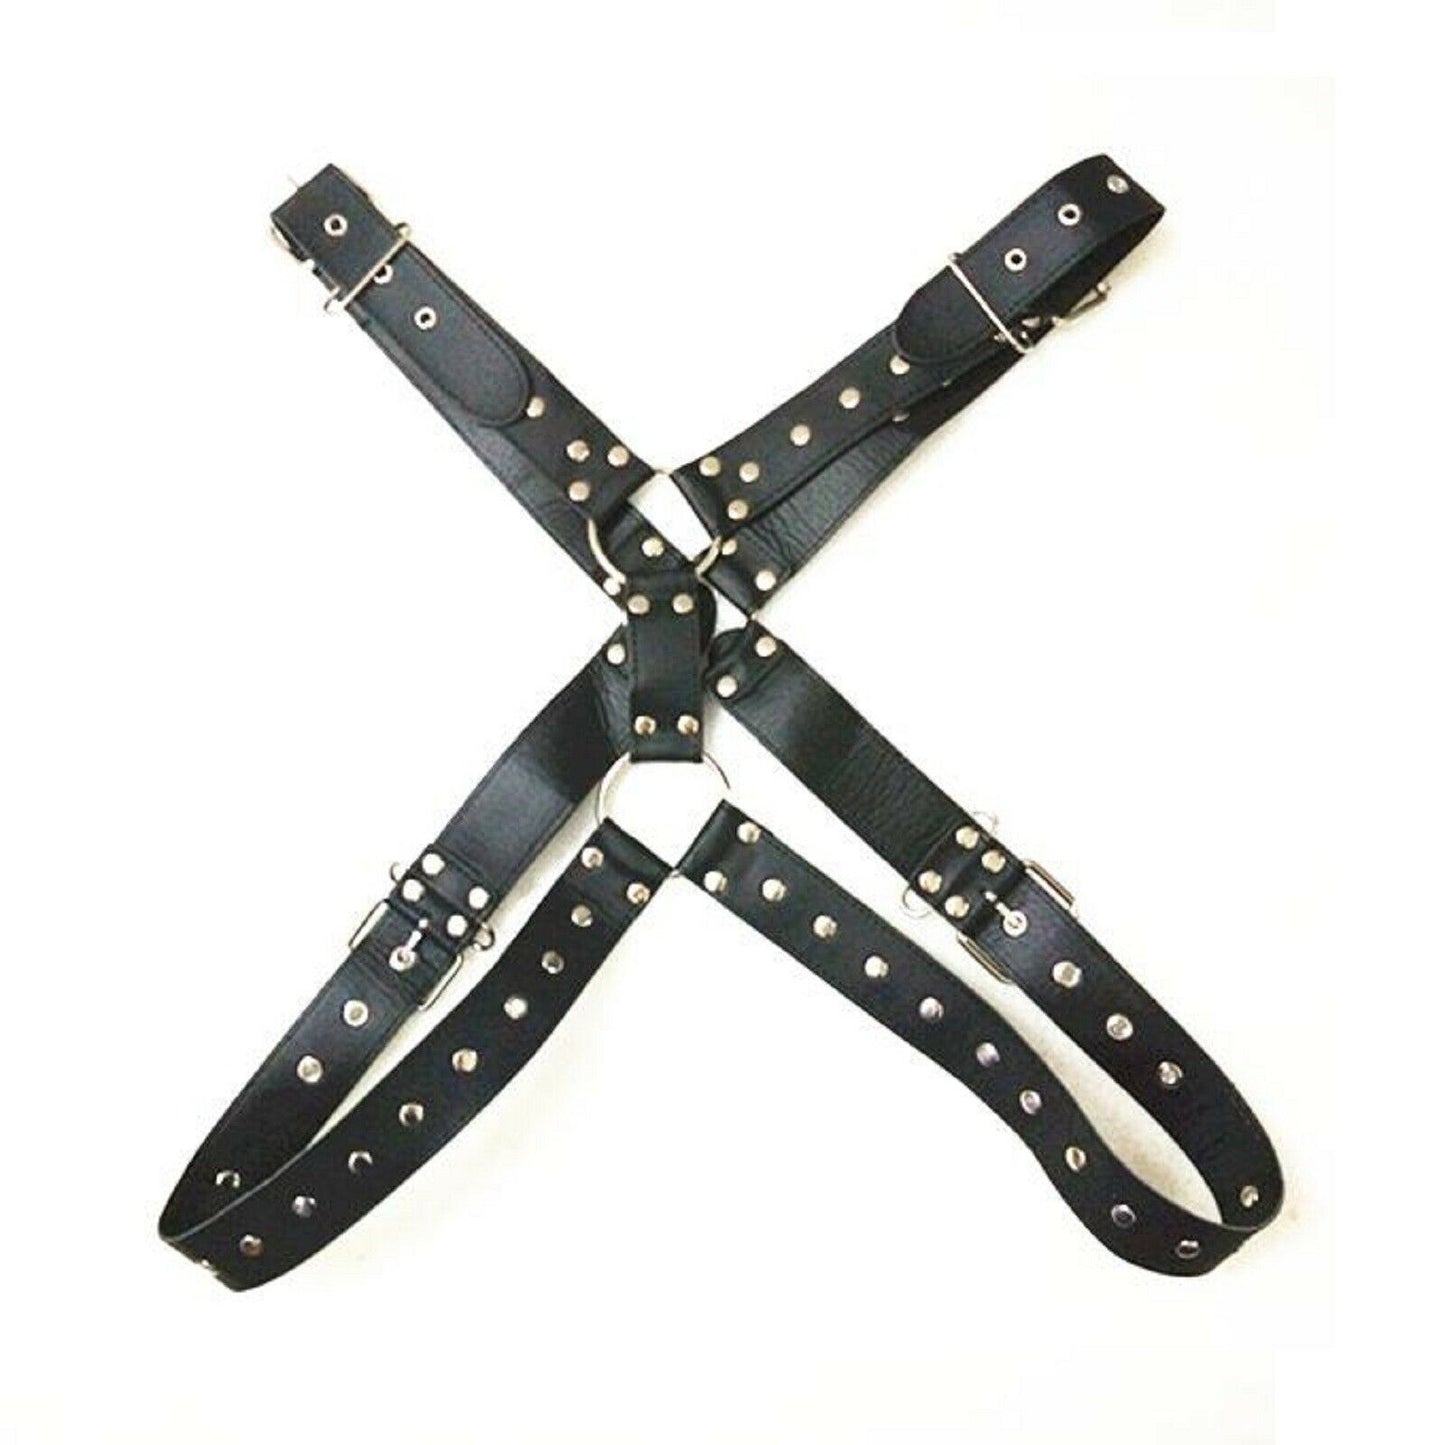 Unisex Chest Harness Faux Leather BDMS Pup Play Strap Clubwear Gay Adult Sex Toy